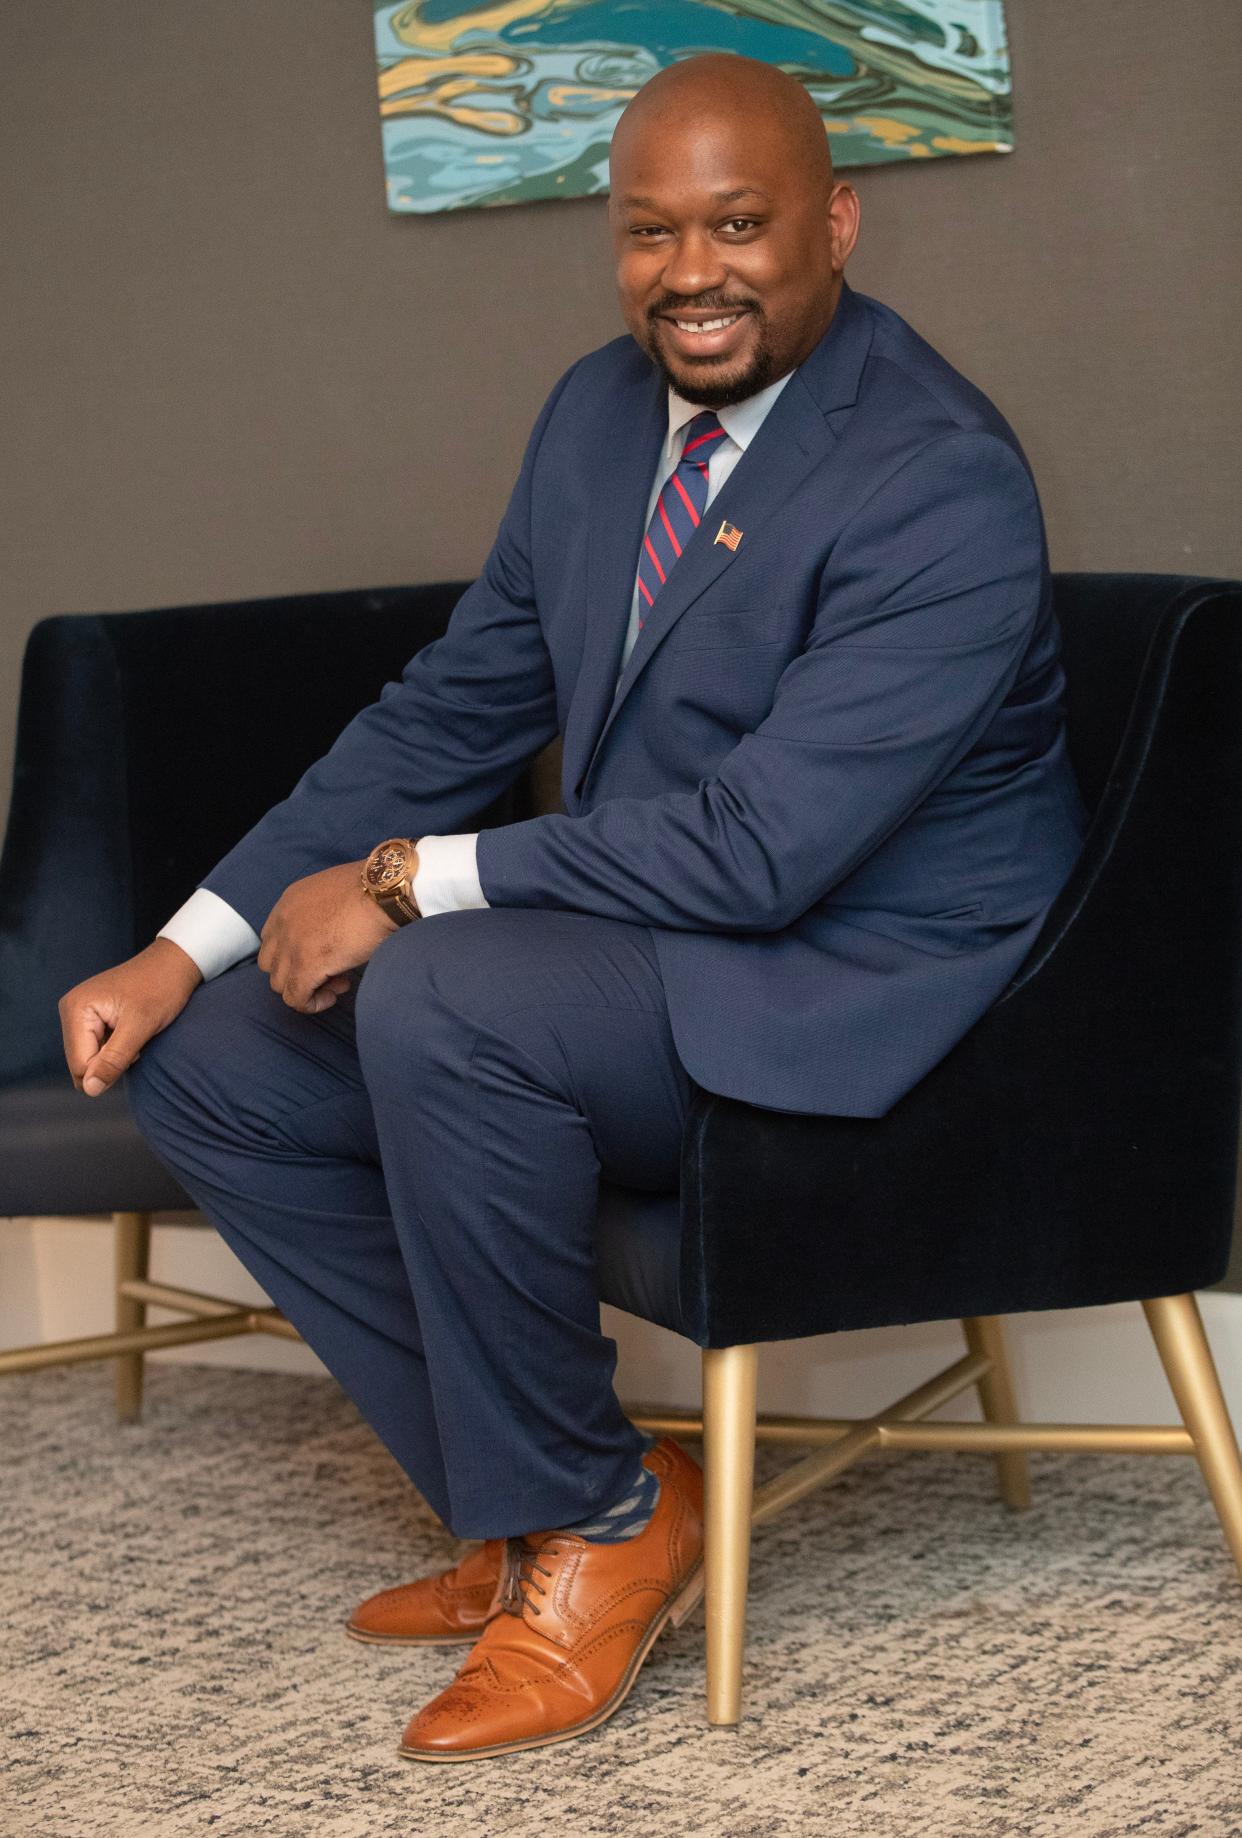 Willis Gordon is running for Canton mayor. He is one of five Democratic candidates on the May 2 primary ballot.